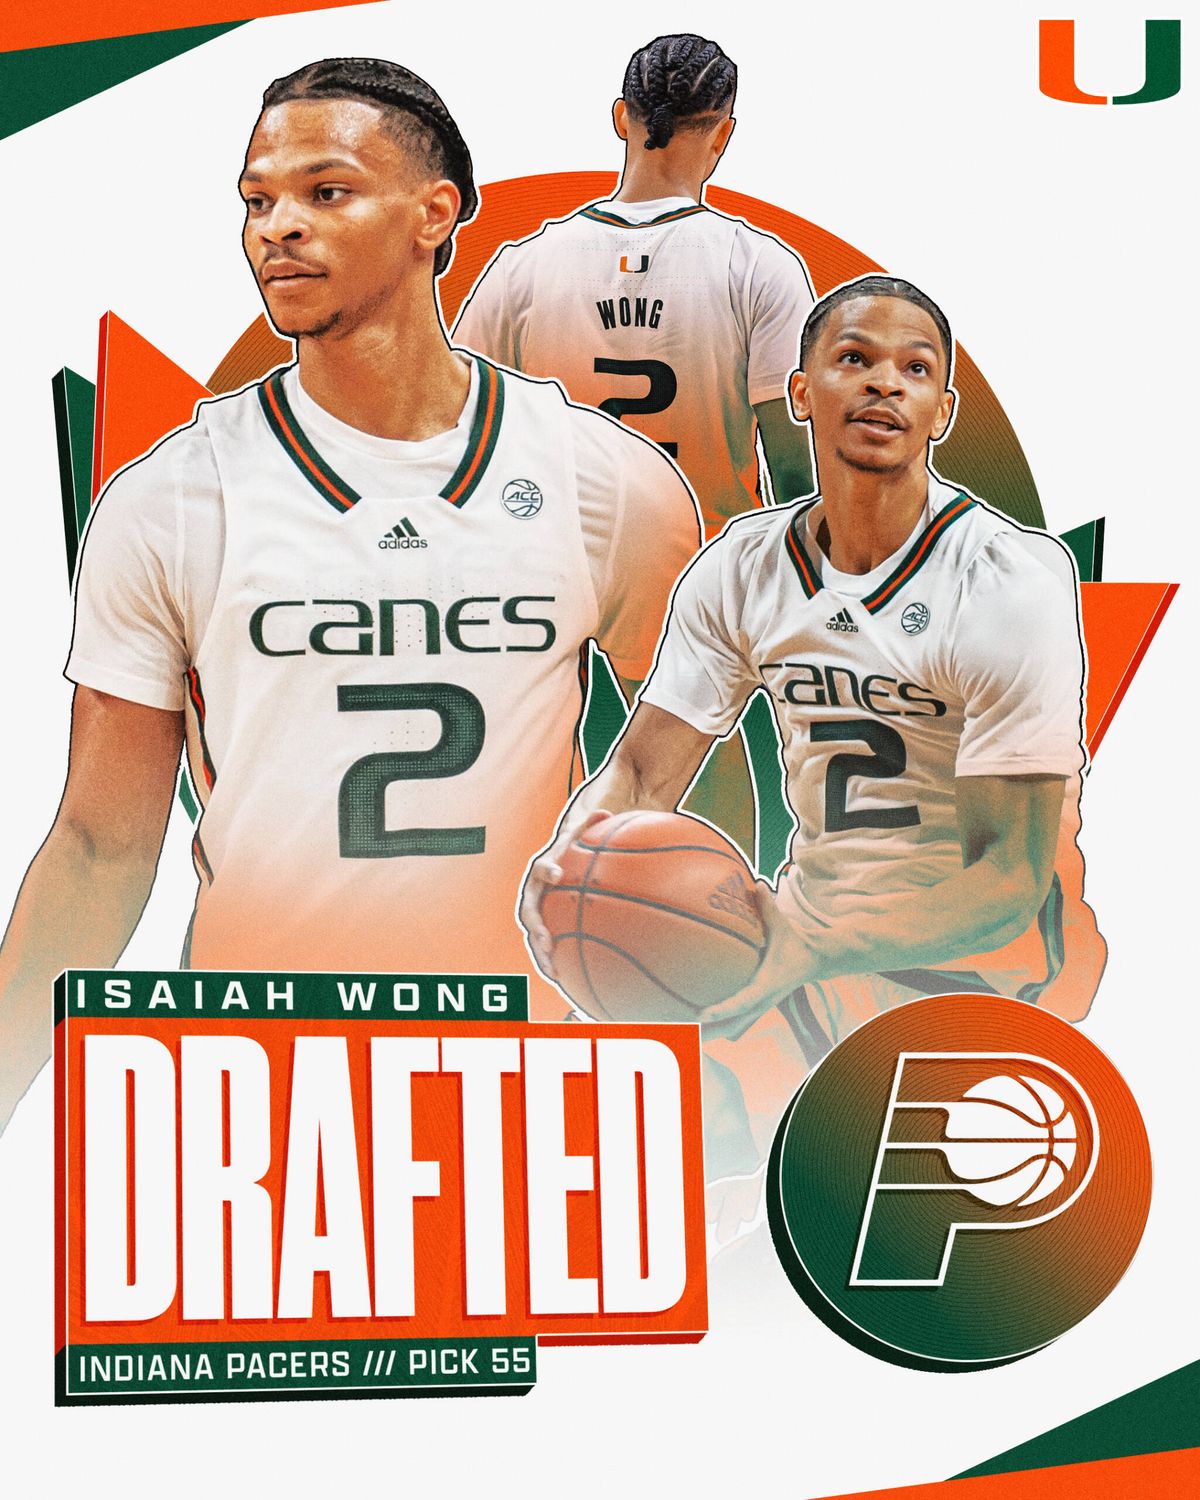 2023 NBA Draft Scouting Report: Miami Hurricanes Wing Jordan Miller - All  Hurricanes on Sports Illustrated: News, Analysis, and More